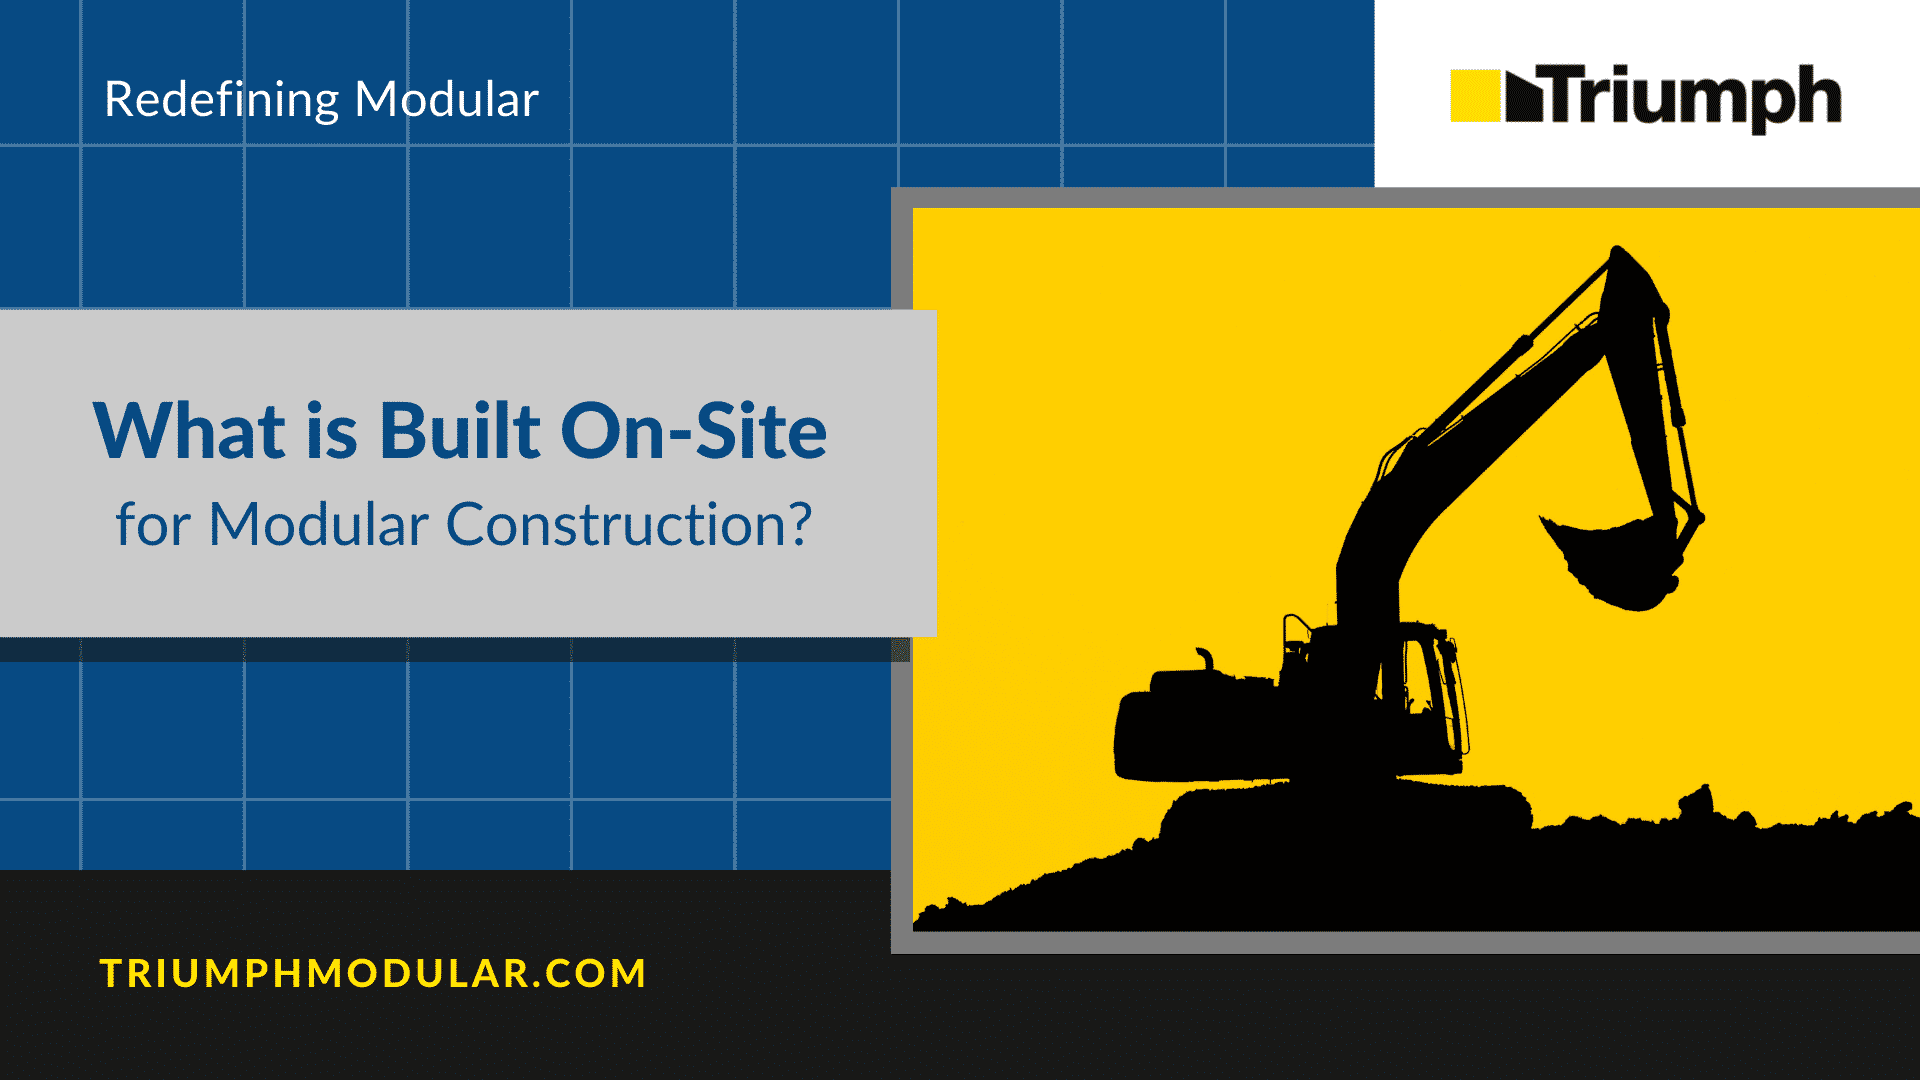 Featured image for article about what is built on-site for modular construction